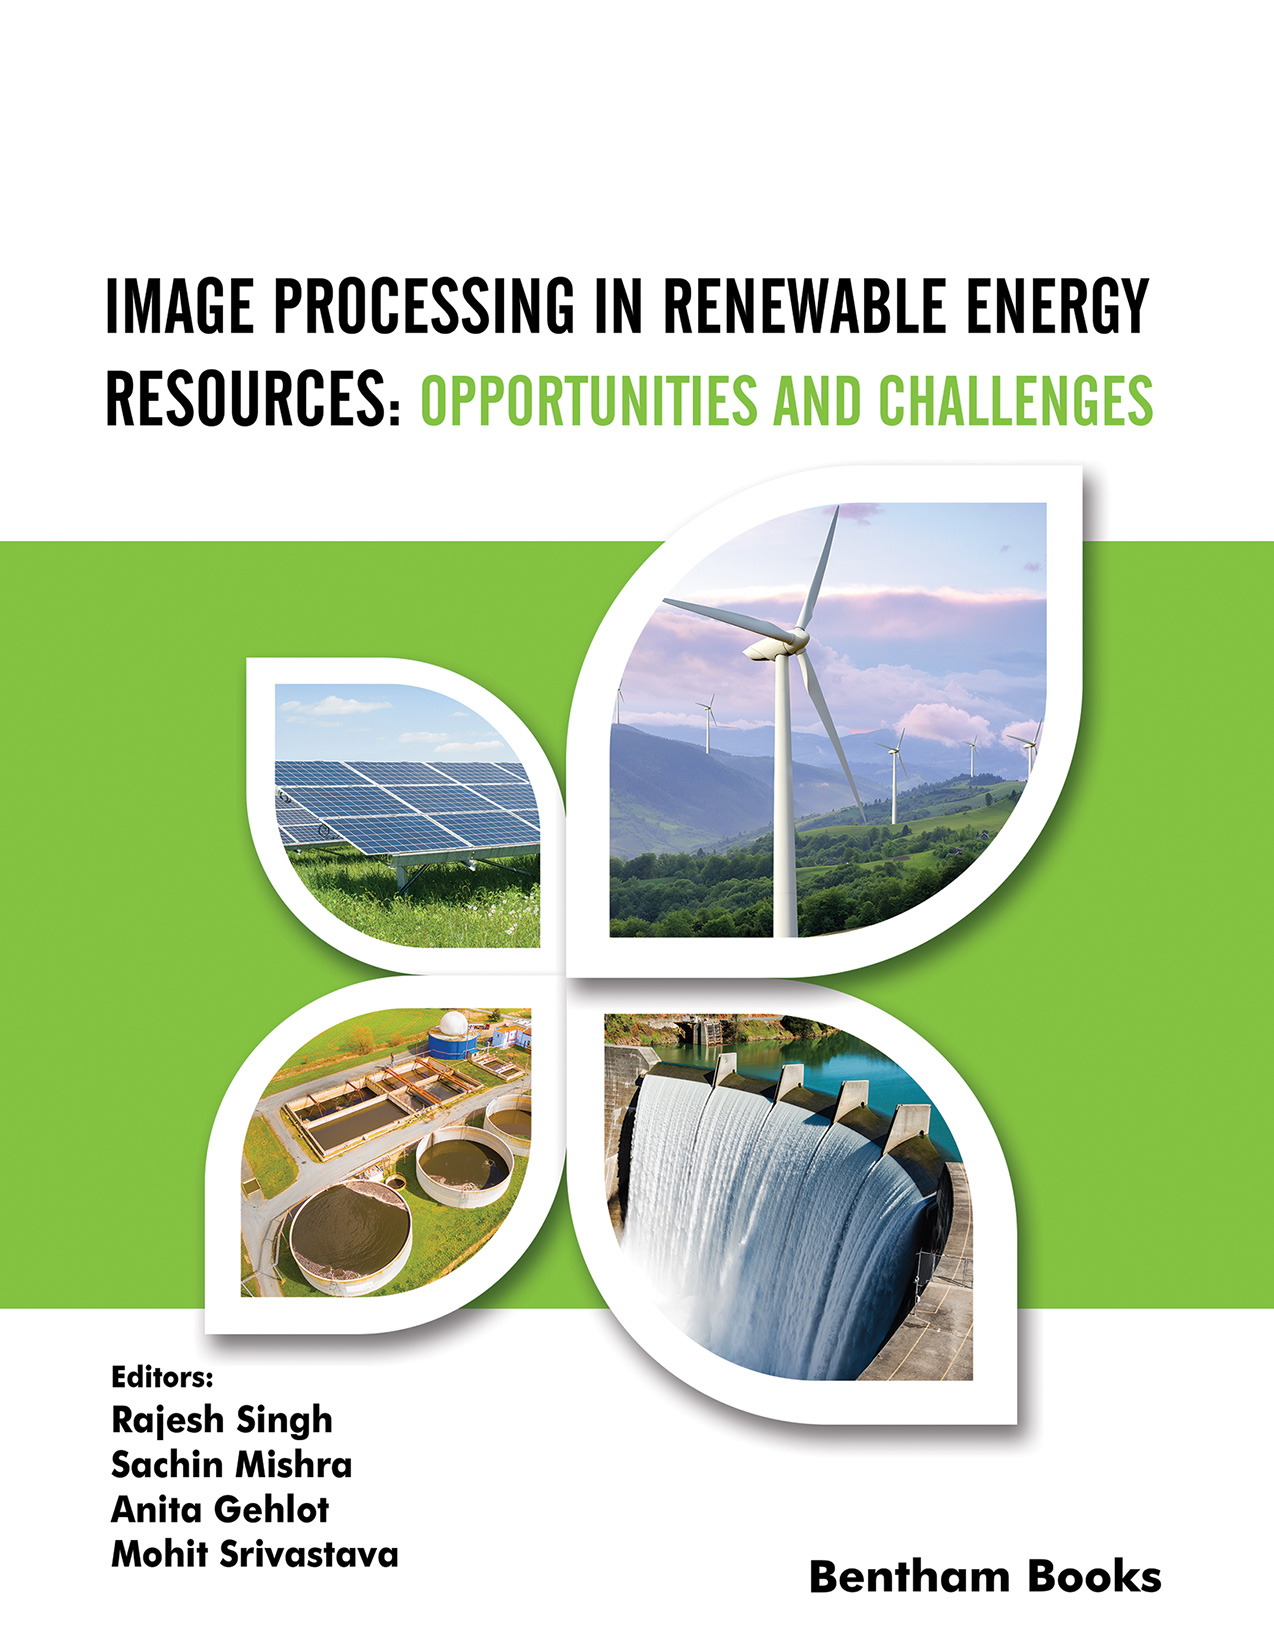 Image Processing in Renewable Energy Resources: Opportunities and Challenges